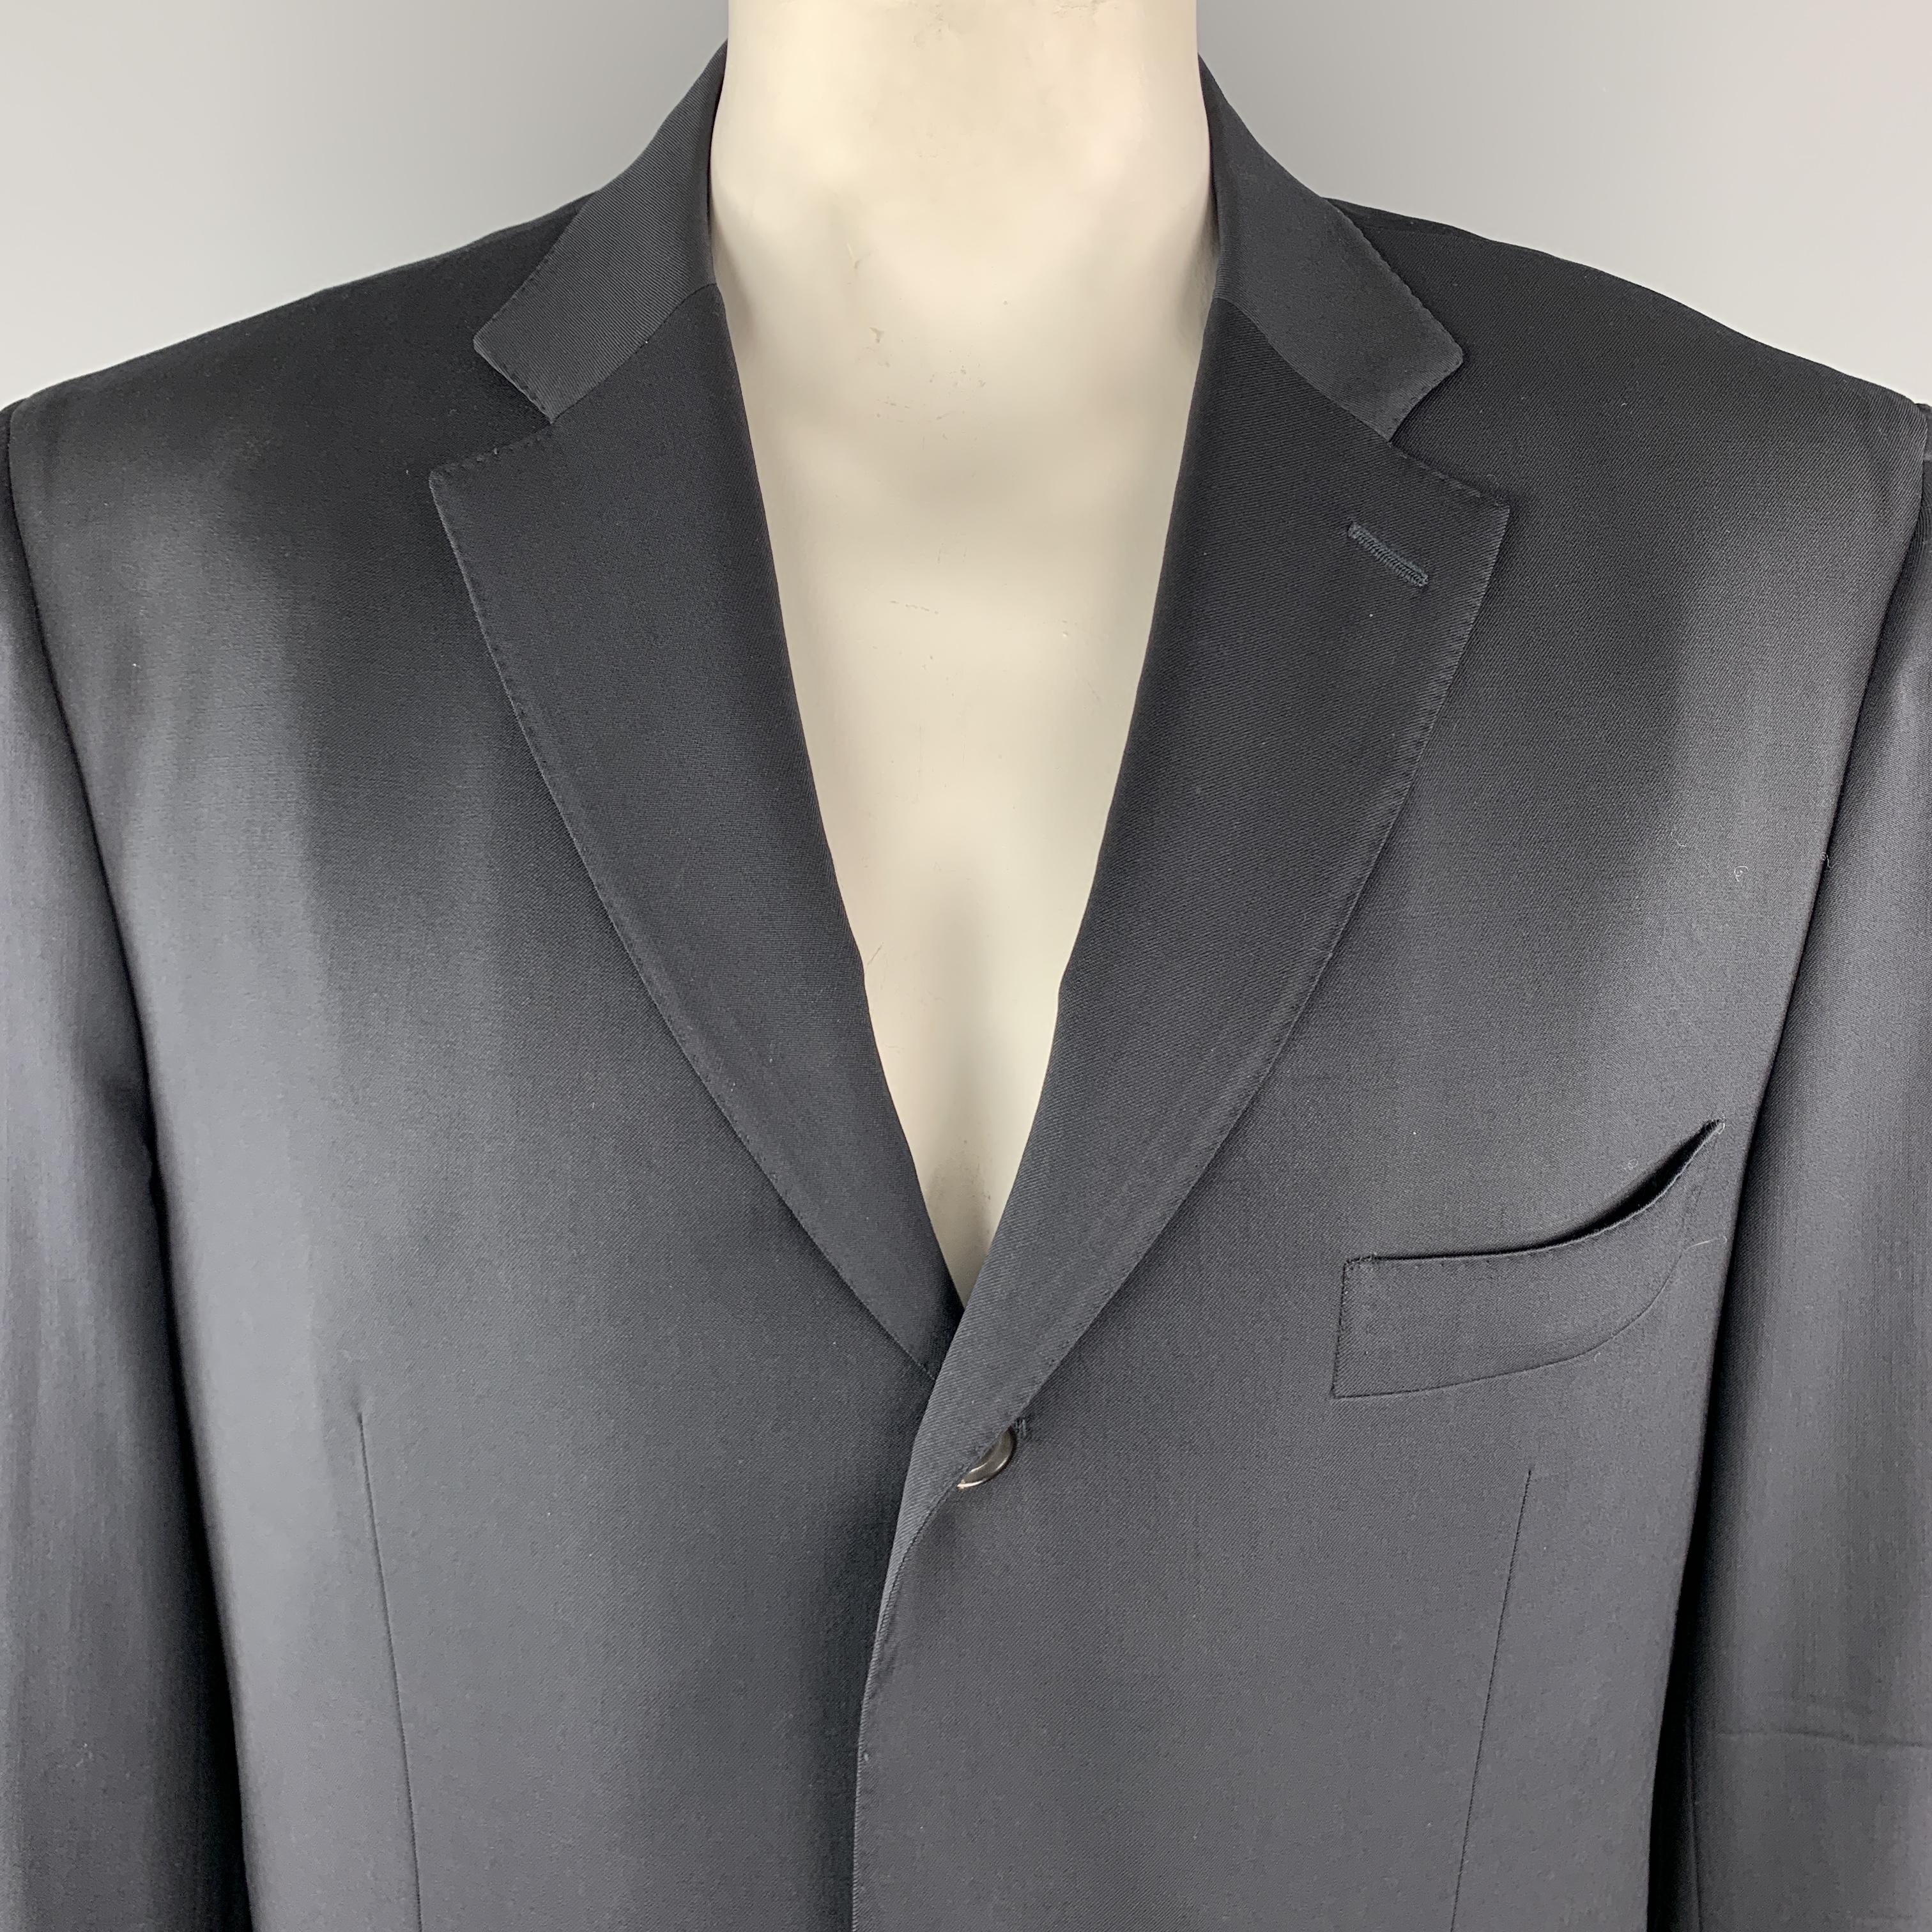 ISAIA Sport Coat comes in a black tone in a solid wool material, with a notch lapel, slit and flap pockets, three buttons at closure, single breasted, functional buttons at cuffs, and a double vent at back. Made in Italy. 

Excellent Pre-Owned